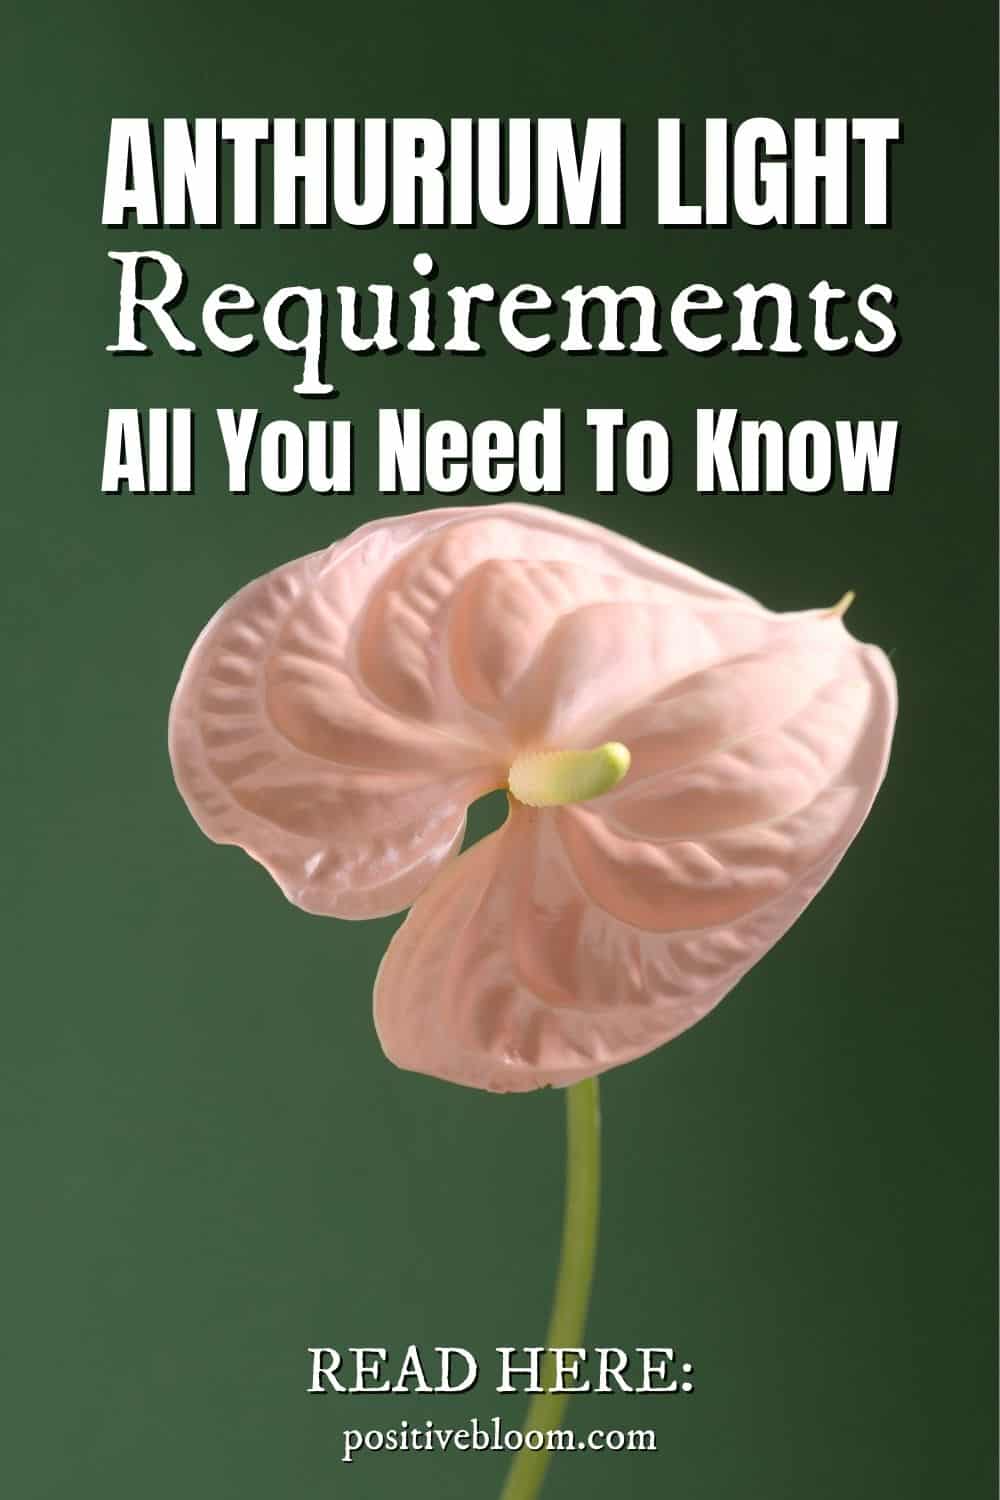 All You Need To Know About Anthurium Light Requirements Pinterest